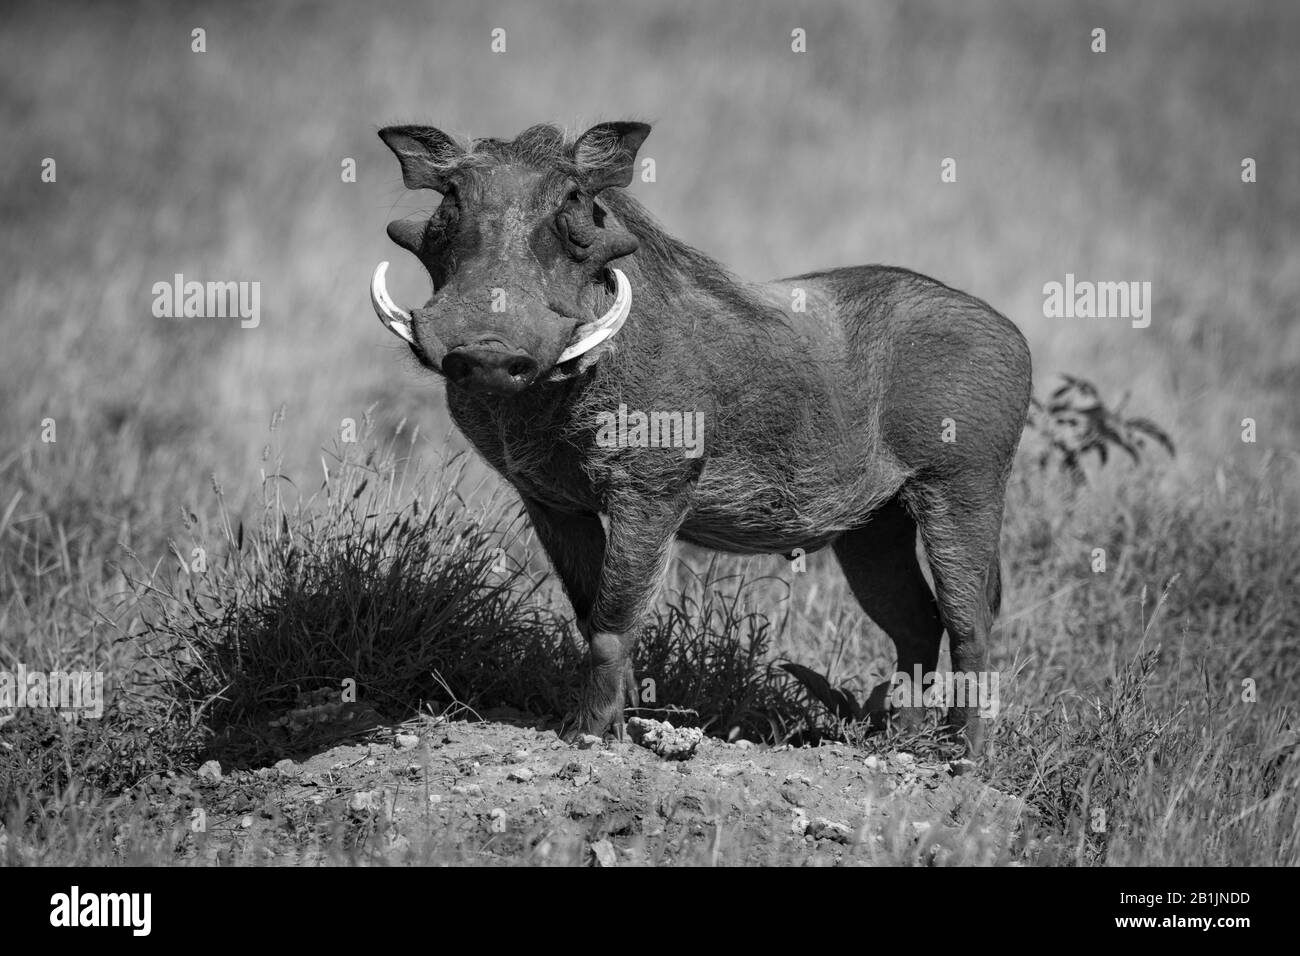 A common warthog stands on an earth mound turning in the sunshine. It has grey skin, a brown mane and white tusks and is turning to face the camera. S Stock Photo